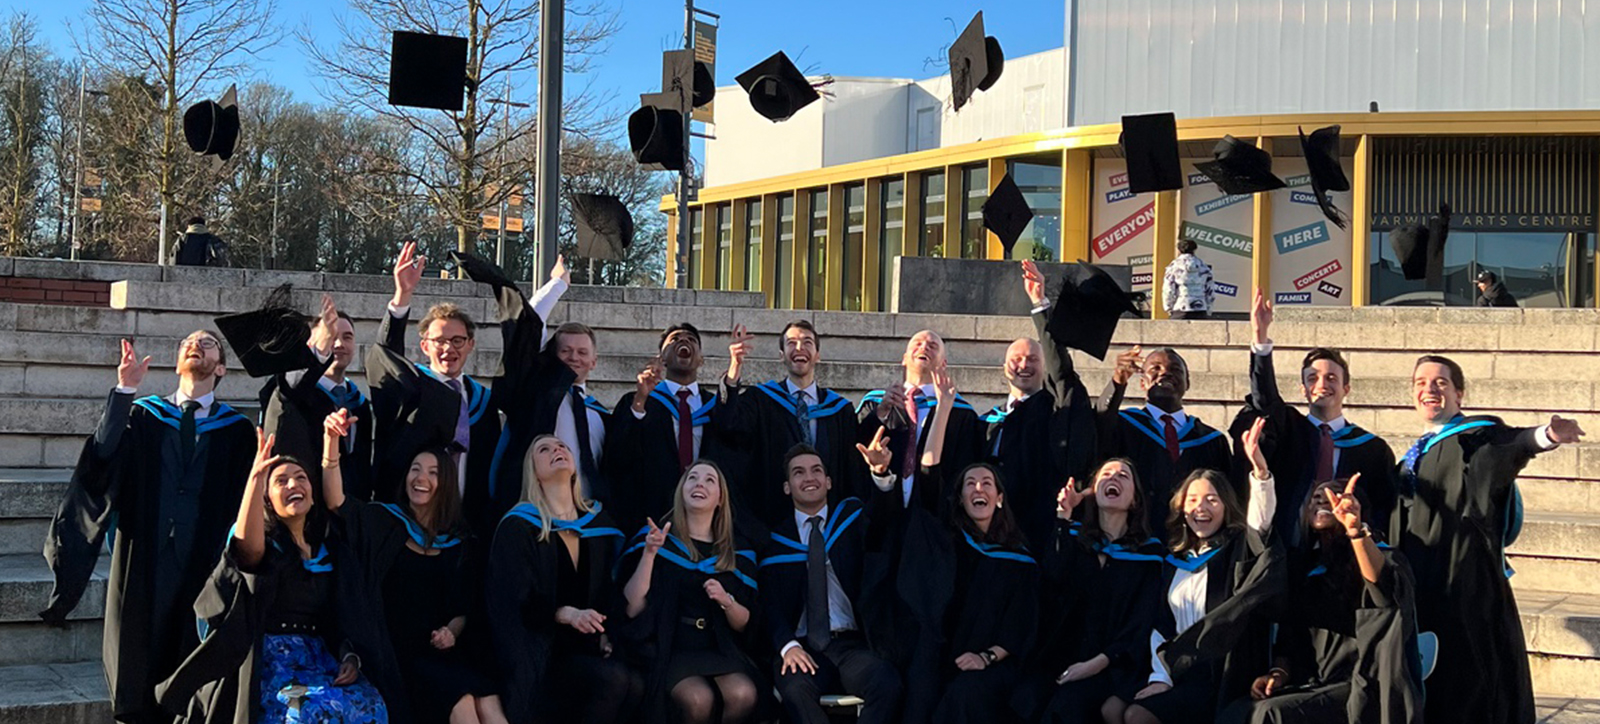 The MSc Global Central Banking and Financial Regulation and Central Baking Qualification cohorts celebrating graduation